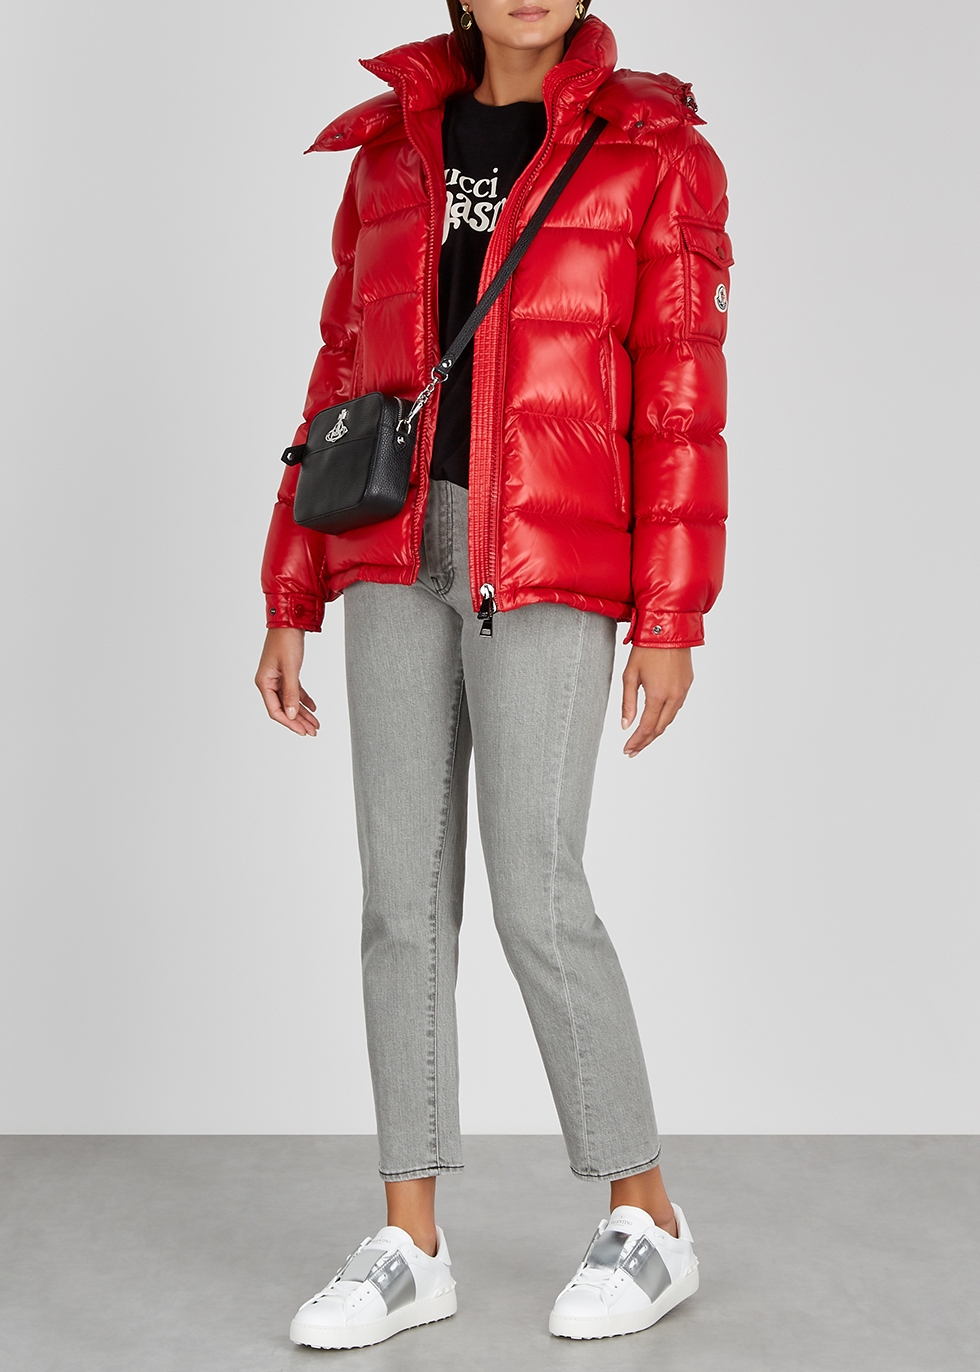 Moncler Maire red shell jacket - Harvey 